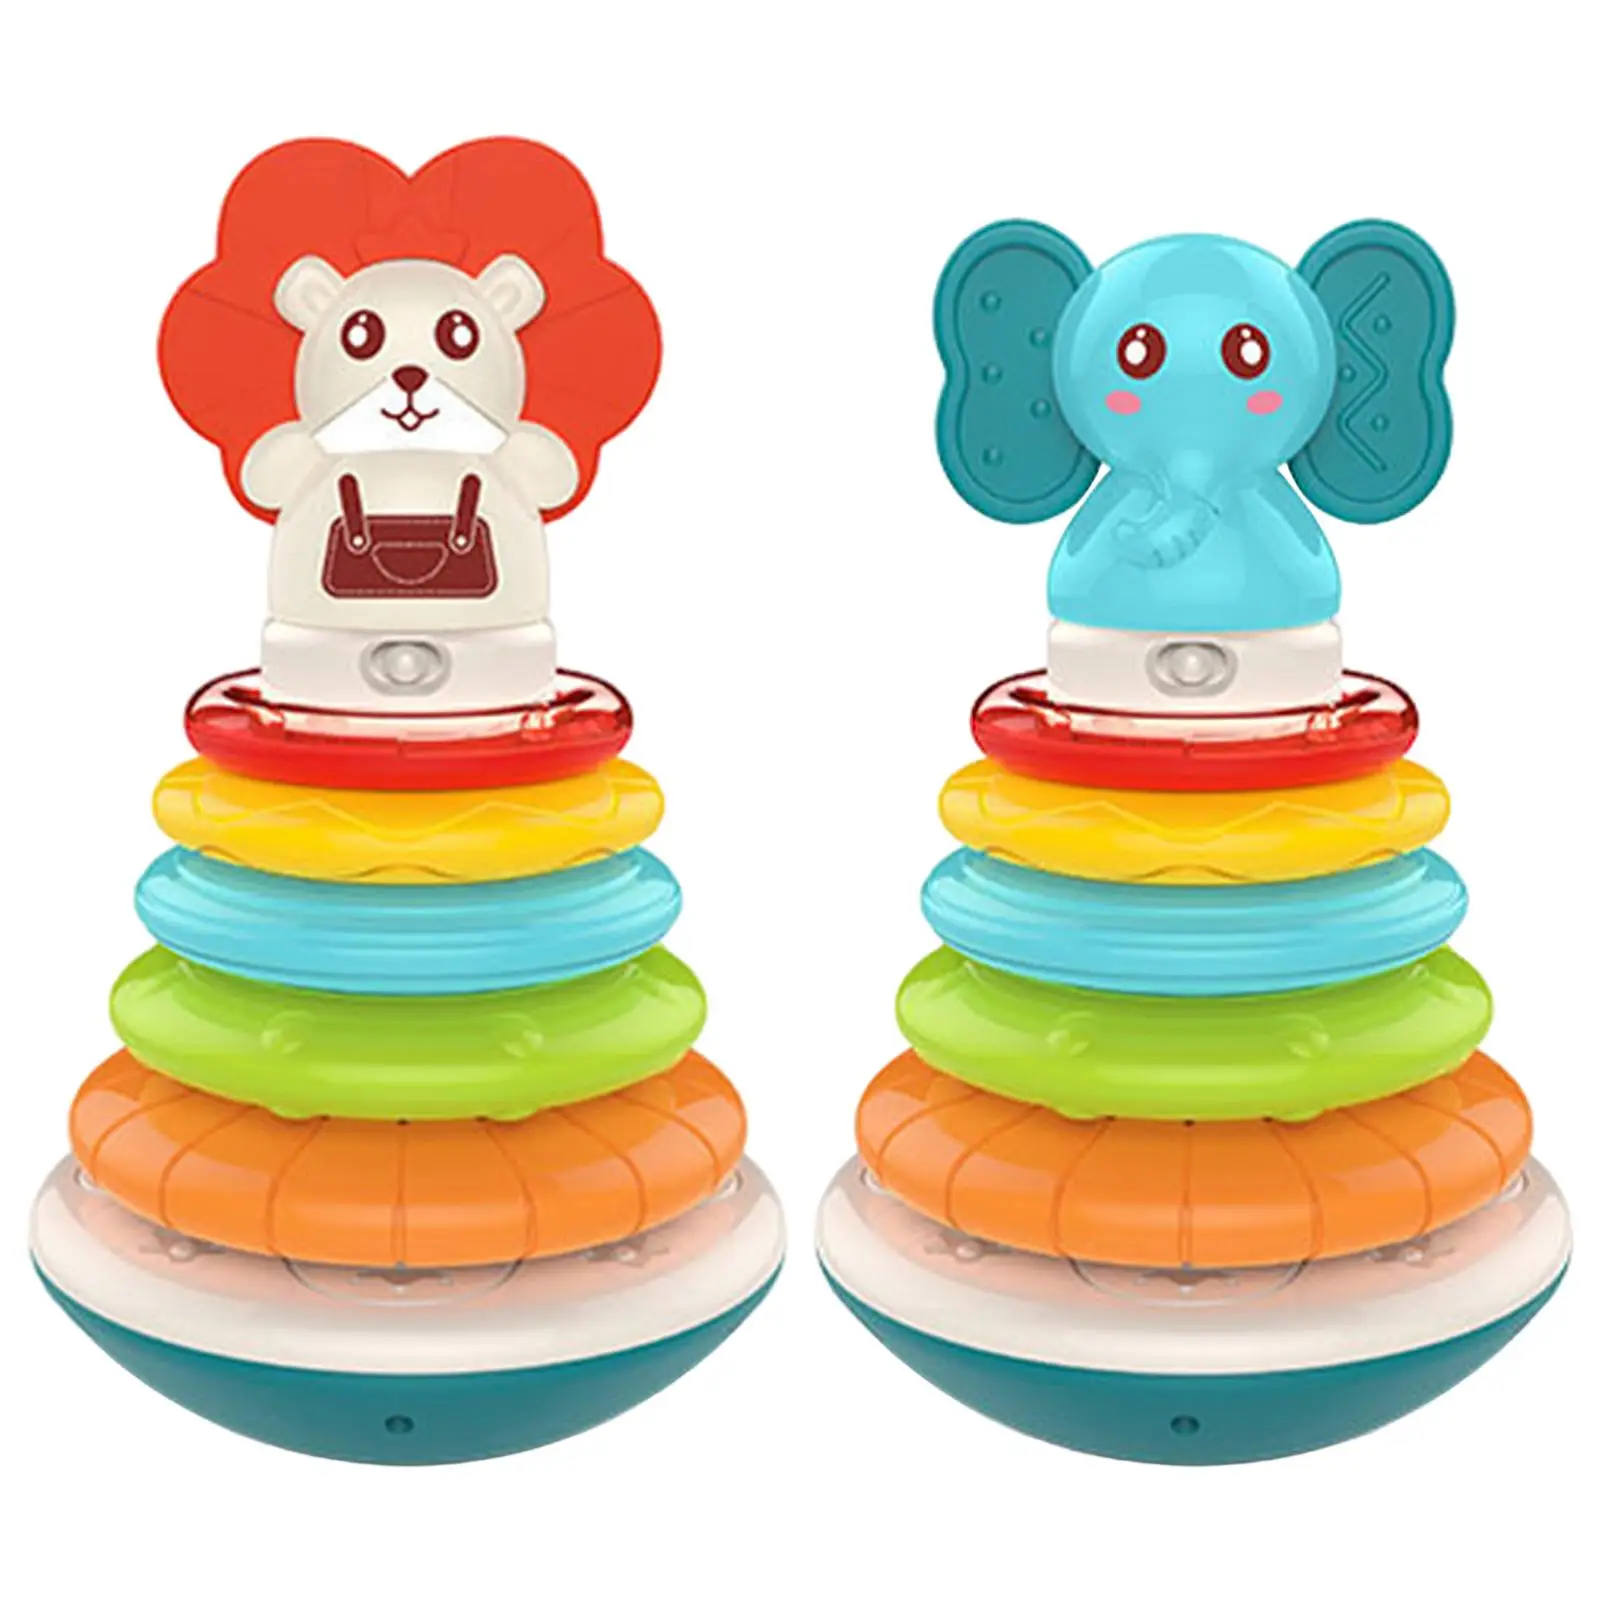 Stacking Toy Colorful Stacking Educational Toys Interactive Toy Tumbler Toy   Babies 6 to 12 Months Preschool Baby